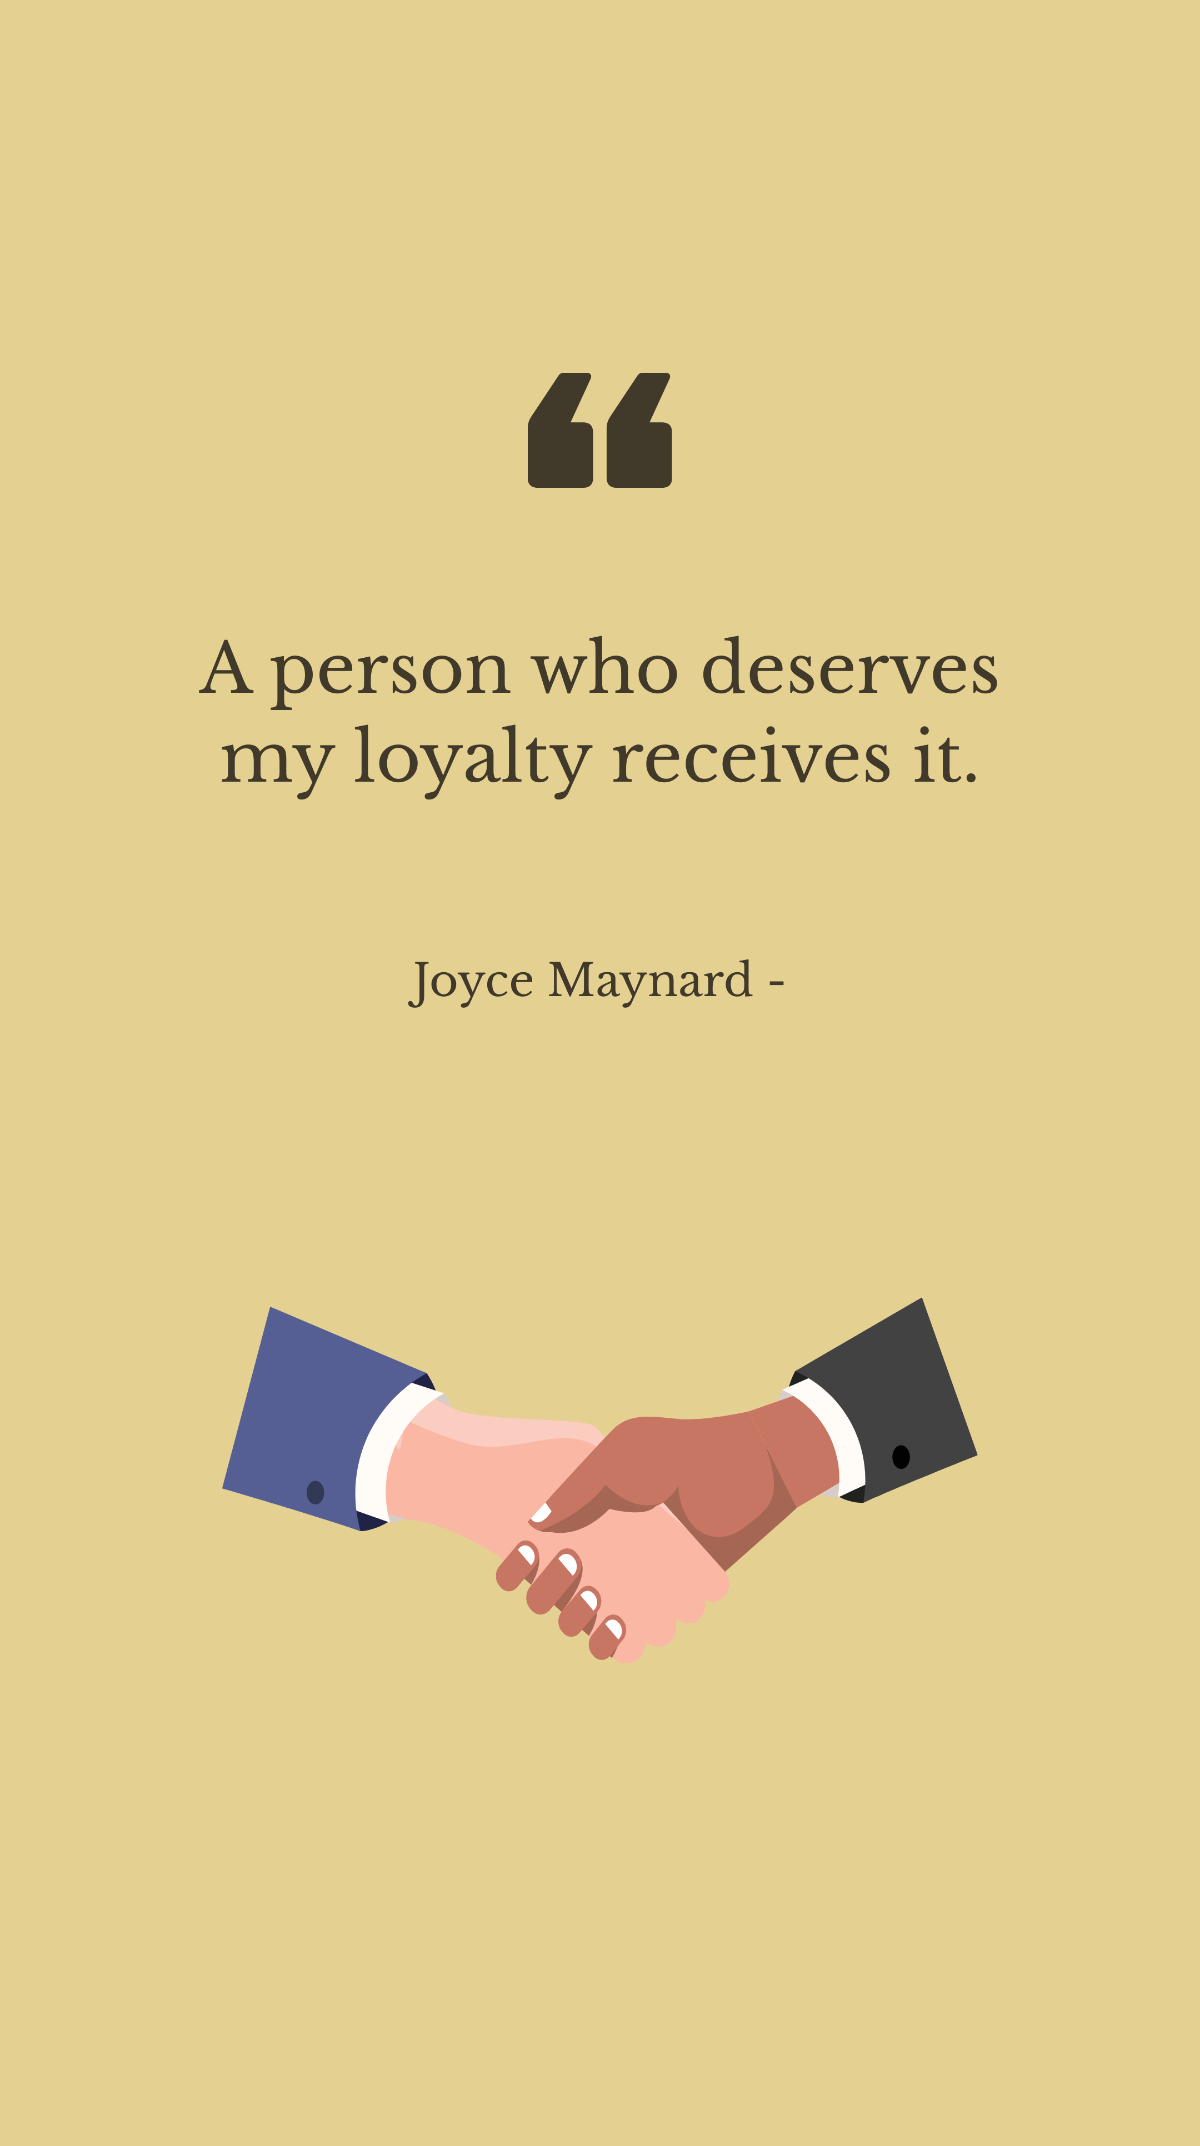 Free Joyce Maynard - A person who deserves my loyalty receives it. Template